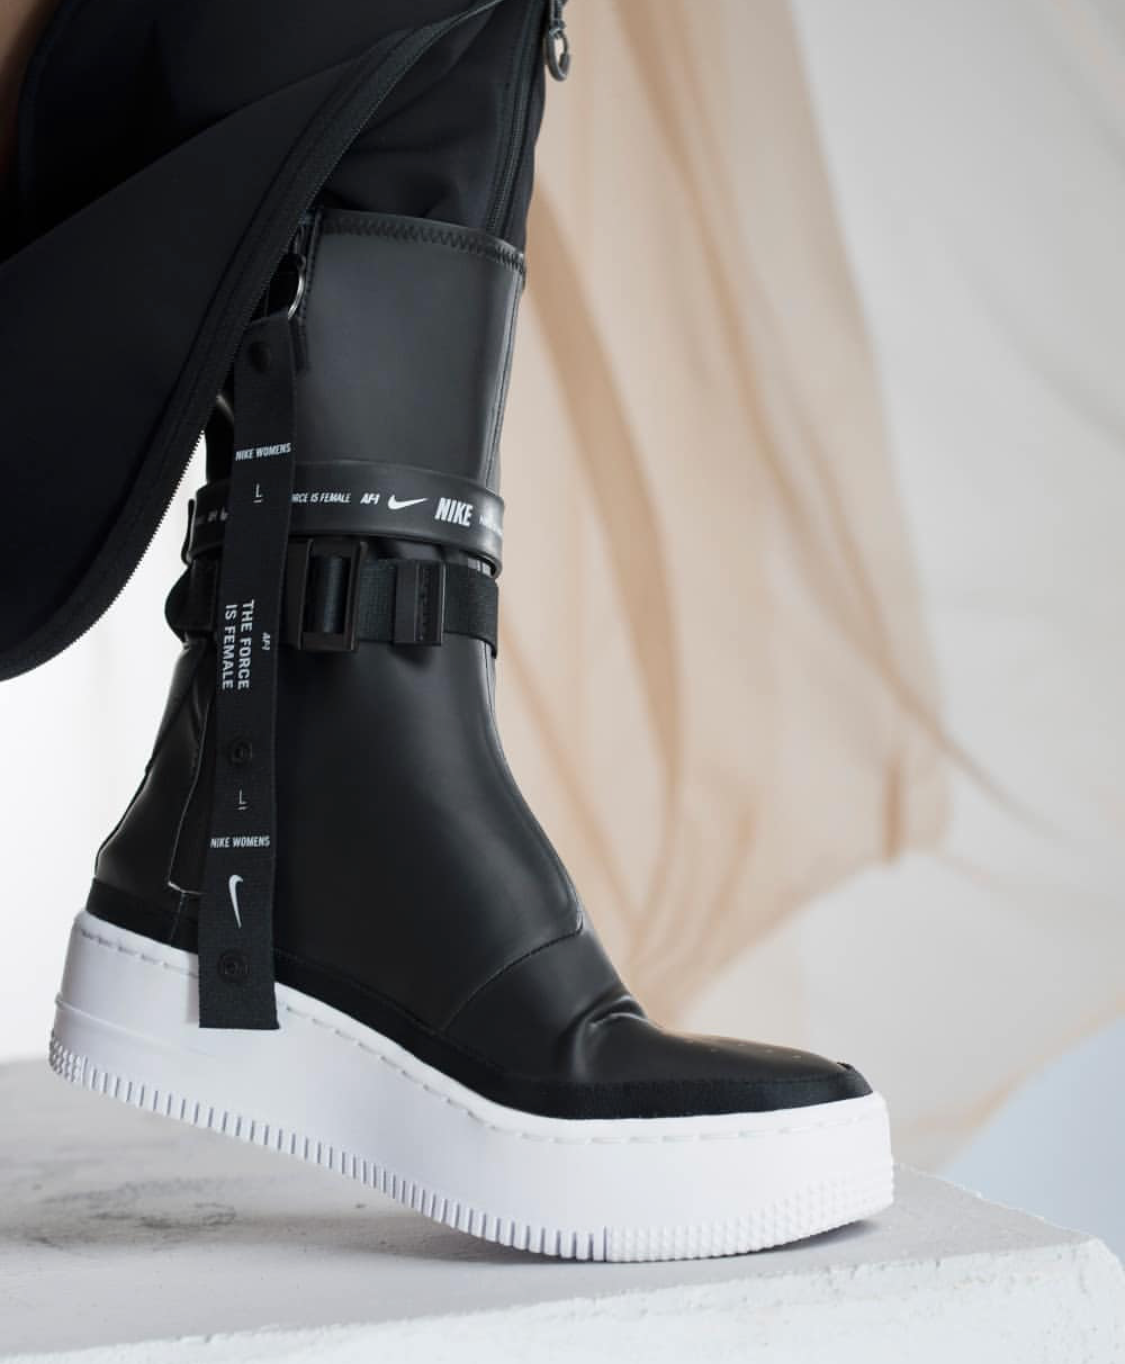 tjenestemænd Arbejdsgiver Fordeling SneakHer Assembly: CNK's Editors Chat About The Upcoming WMNS Nike Boots —  CNK Daily (ChicksNKicks)